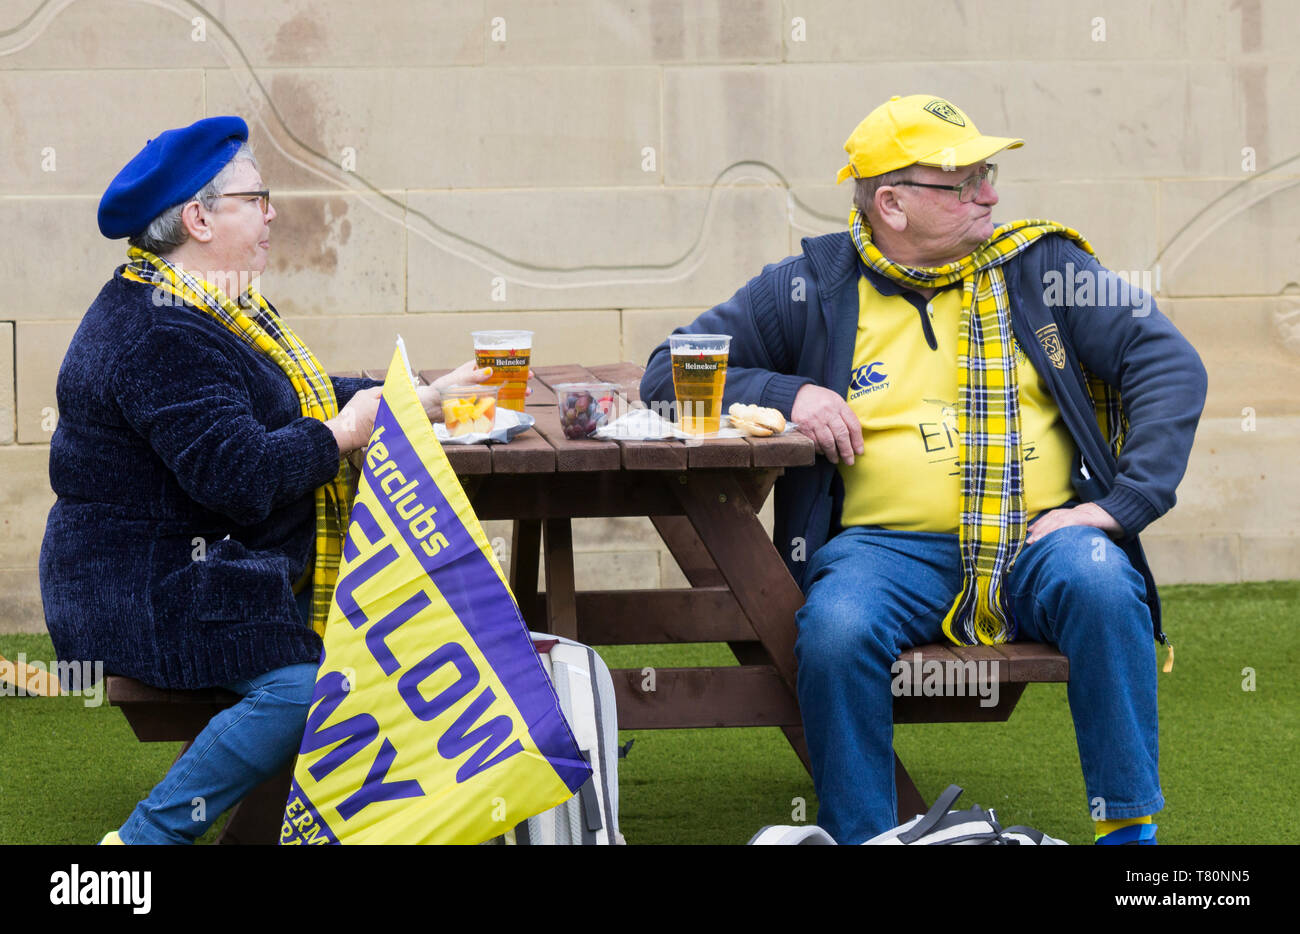 ASM Clermont Auvergne rugby fans in Newcastle uk for the 2019 European Rugby Champions Cup Finals. French clubs Stock Photo